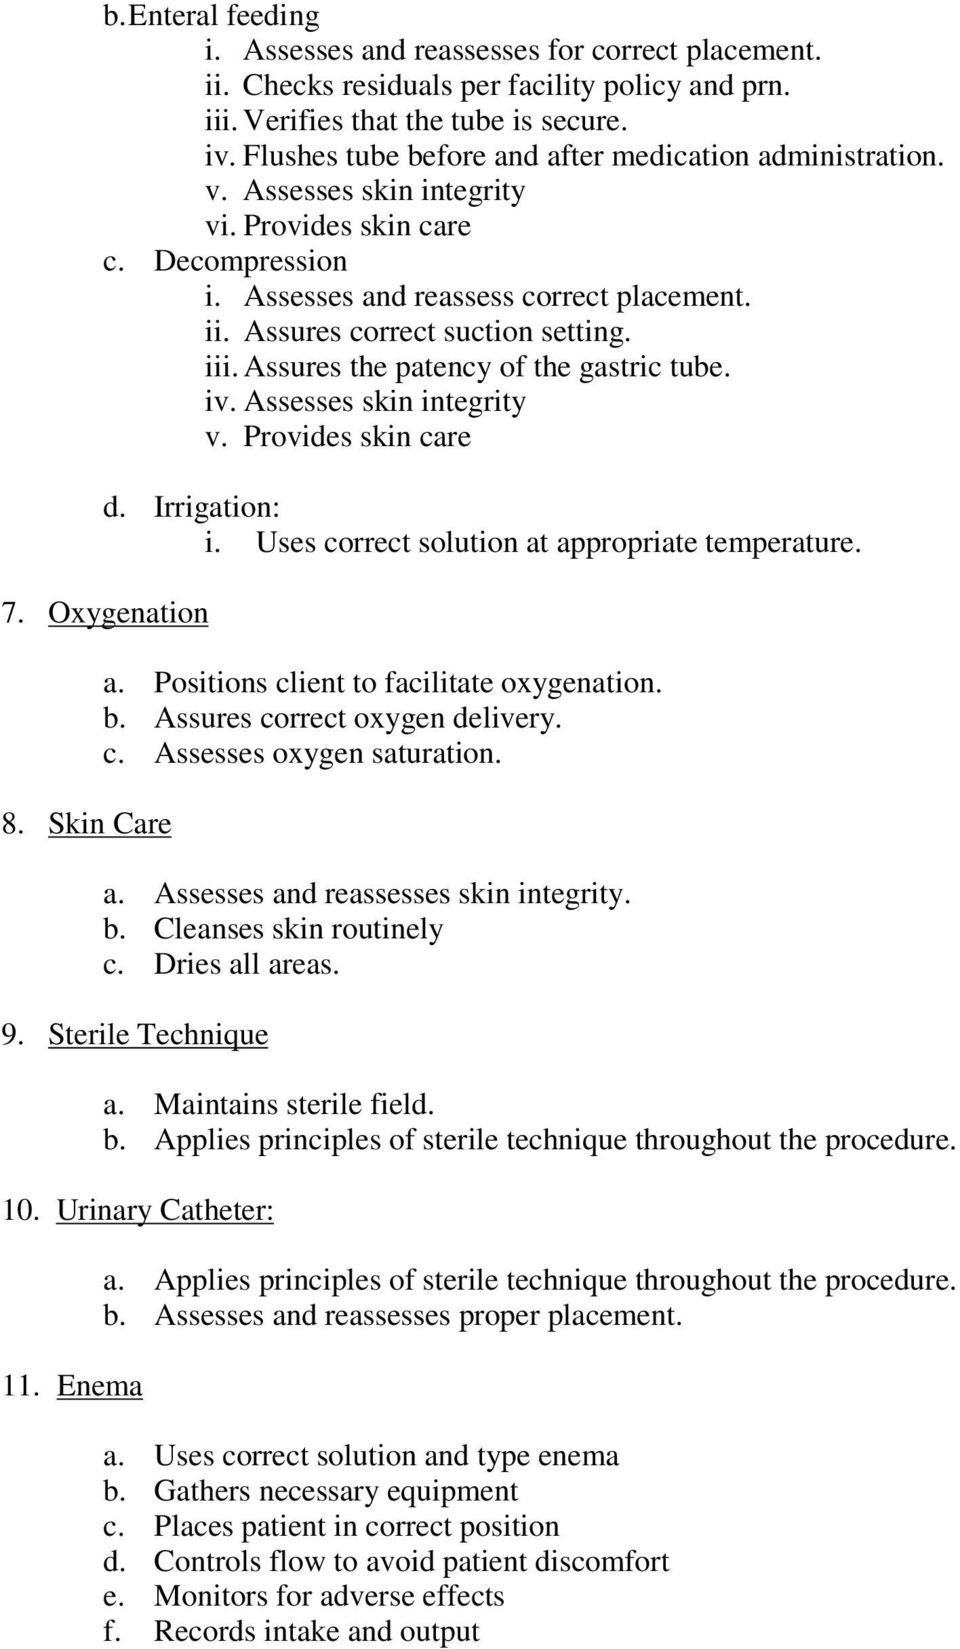 Assures correct suction setting. iii. Assures the patency of the gastric tube. iv. Assesses skin integrity v. Provides skin care d. Irrigation: i. Uses correct solution at appropriate temperature. 7.